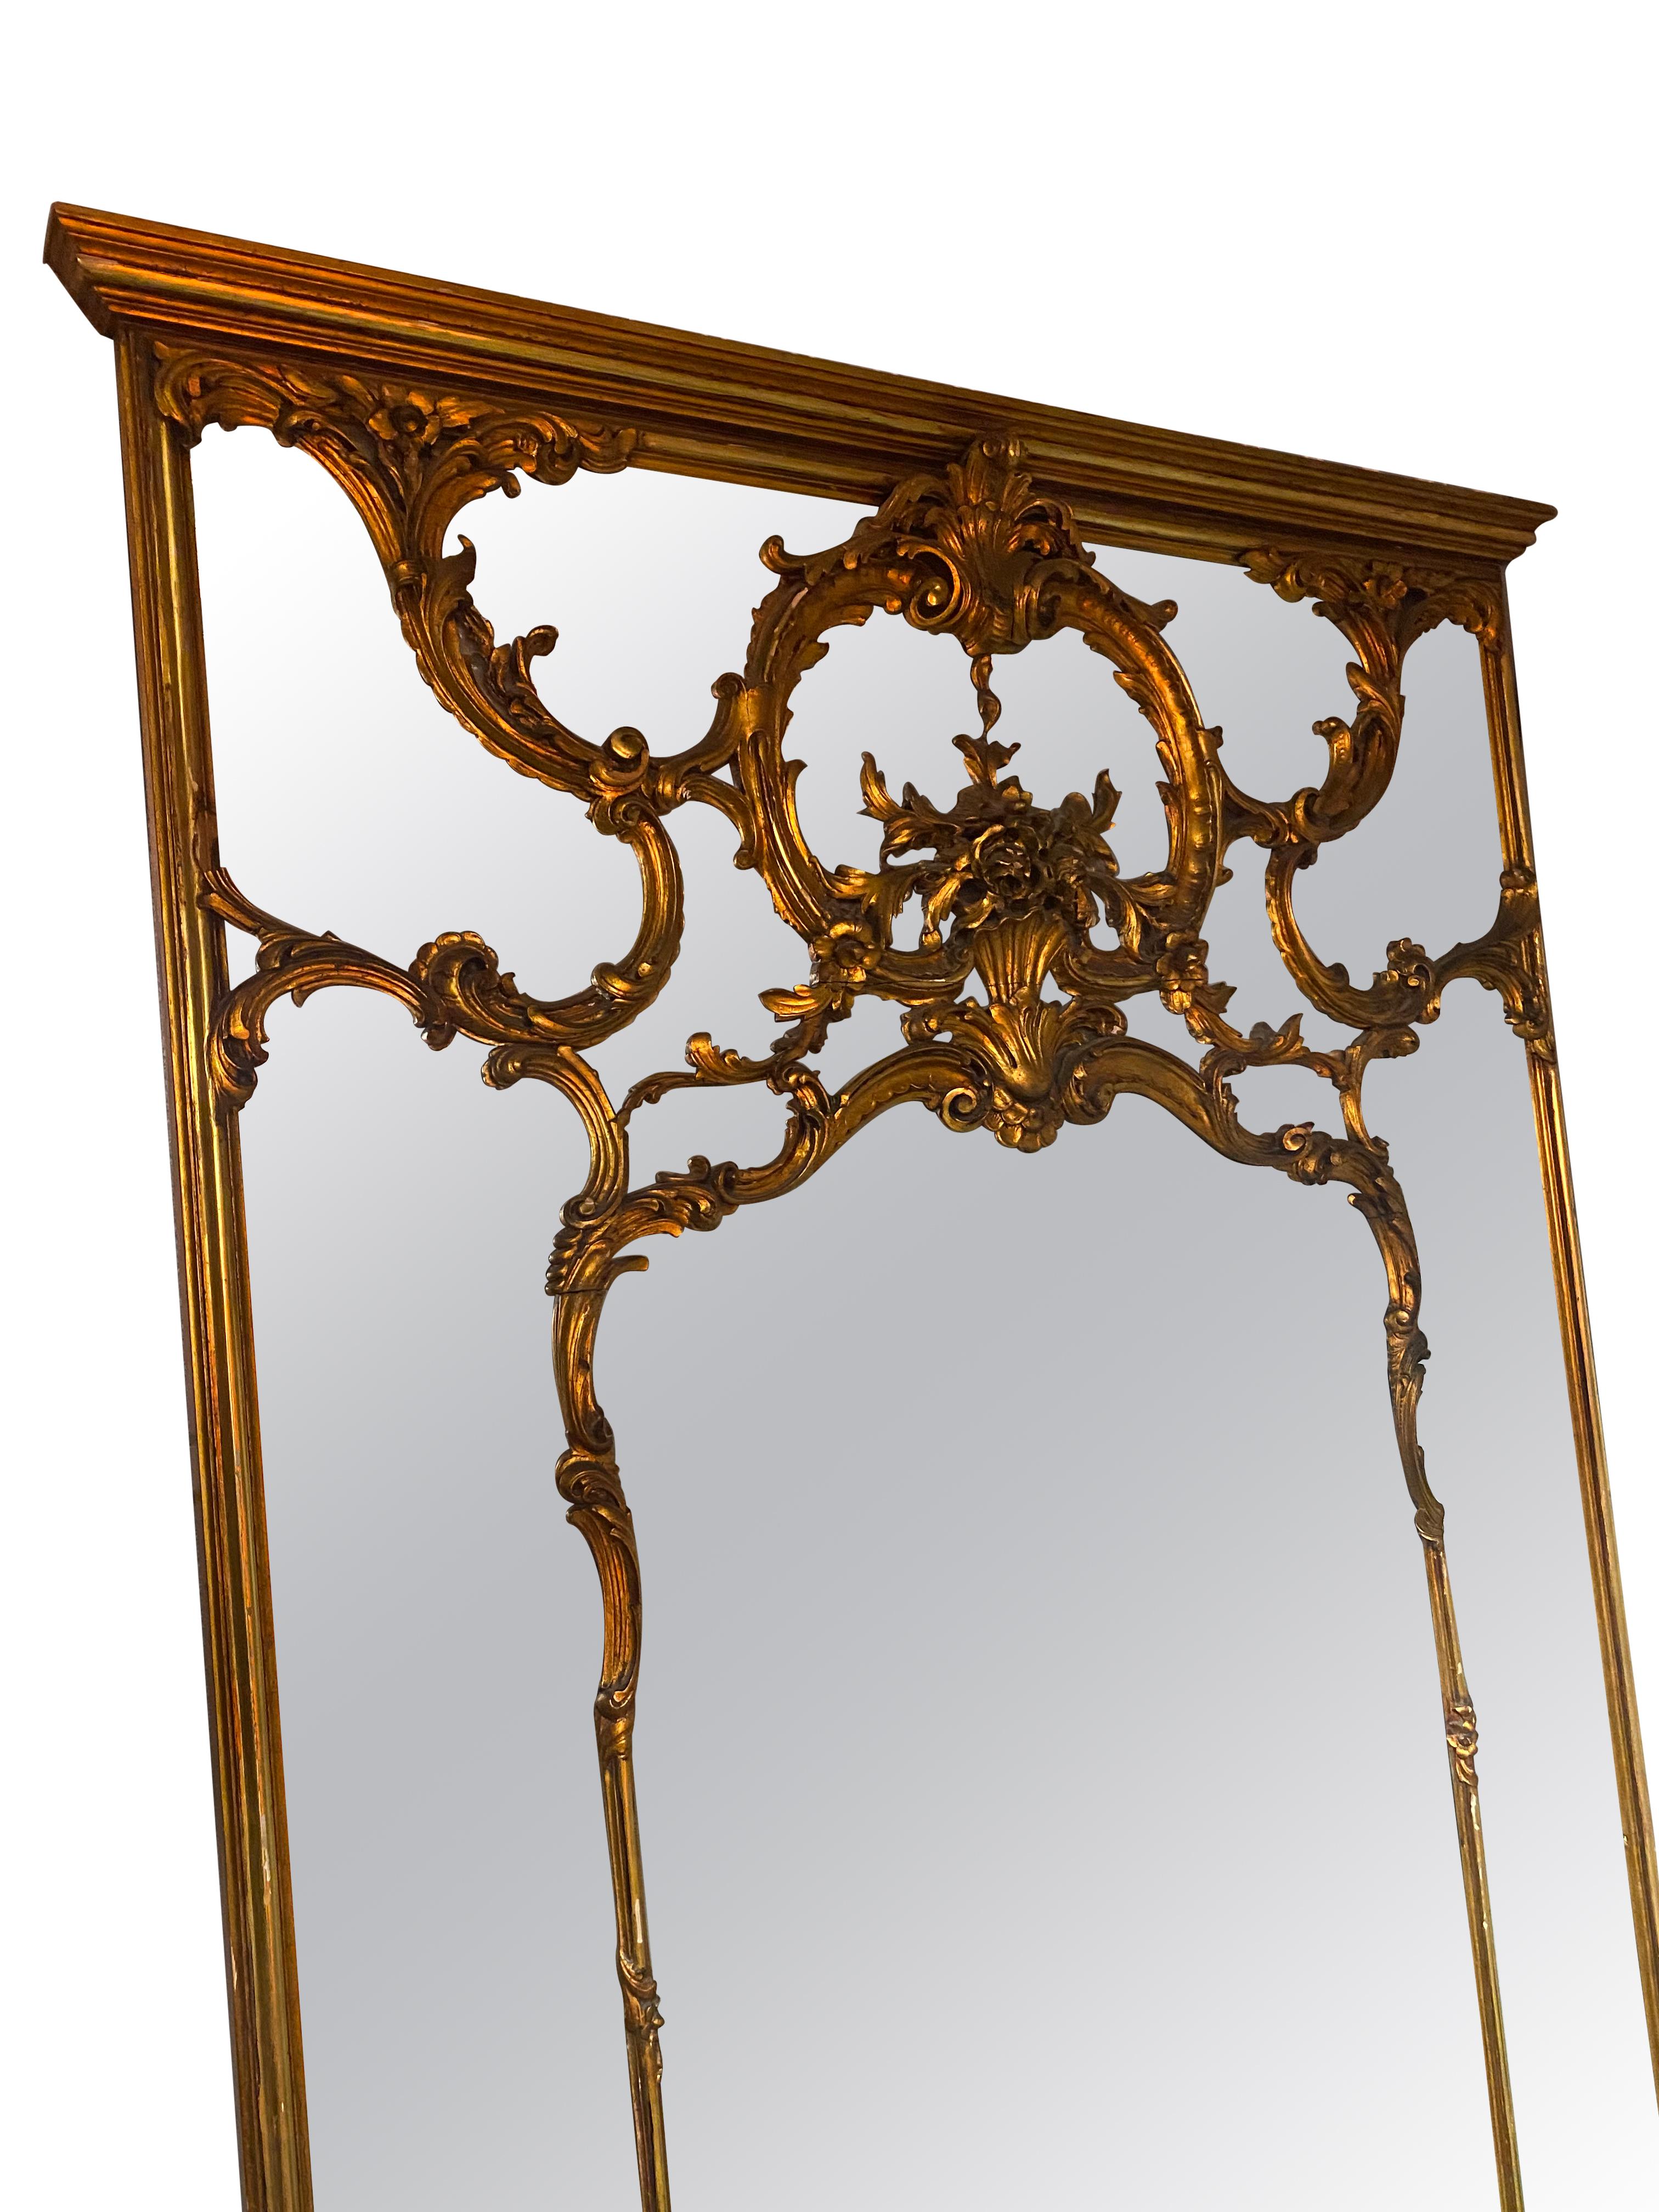 20th Century Antique, Decorative, Giltwood, Full Length Mirror  For Sale